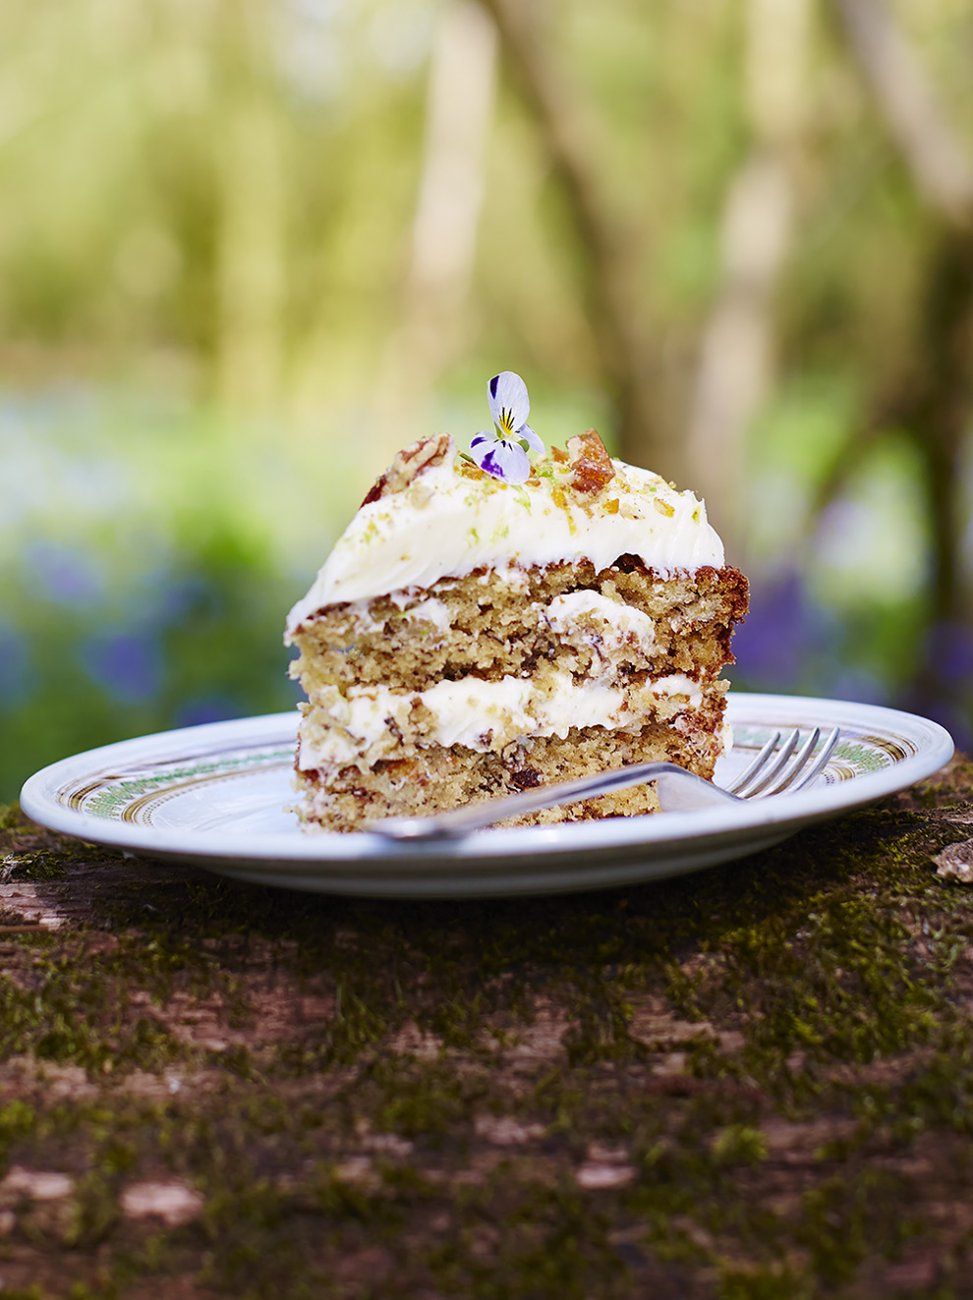 Hummingbird Cake (without nuts) - Mindy's Cooking Obsession